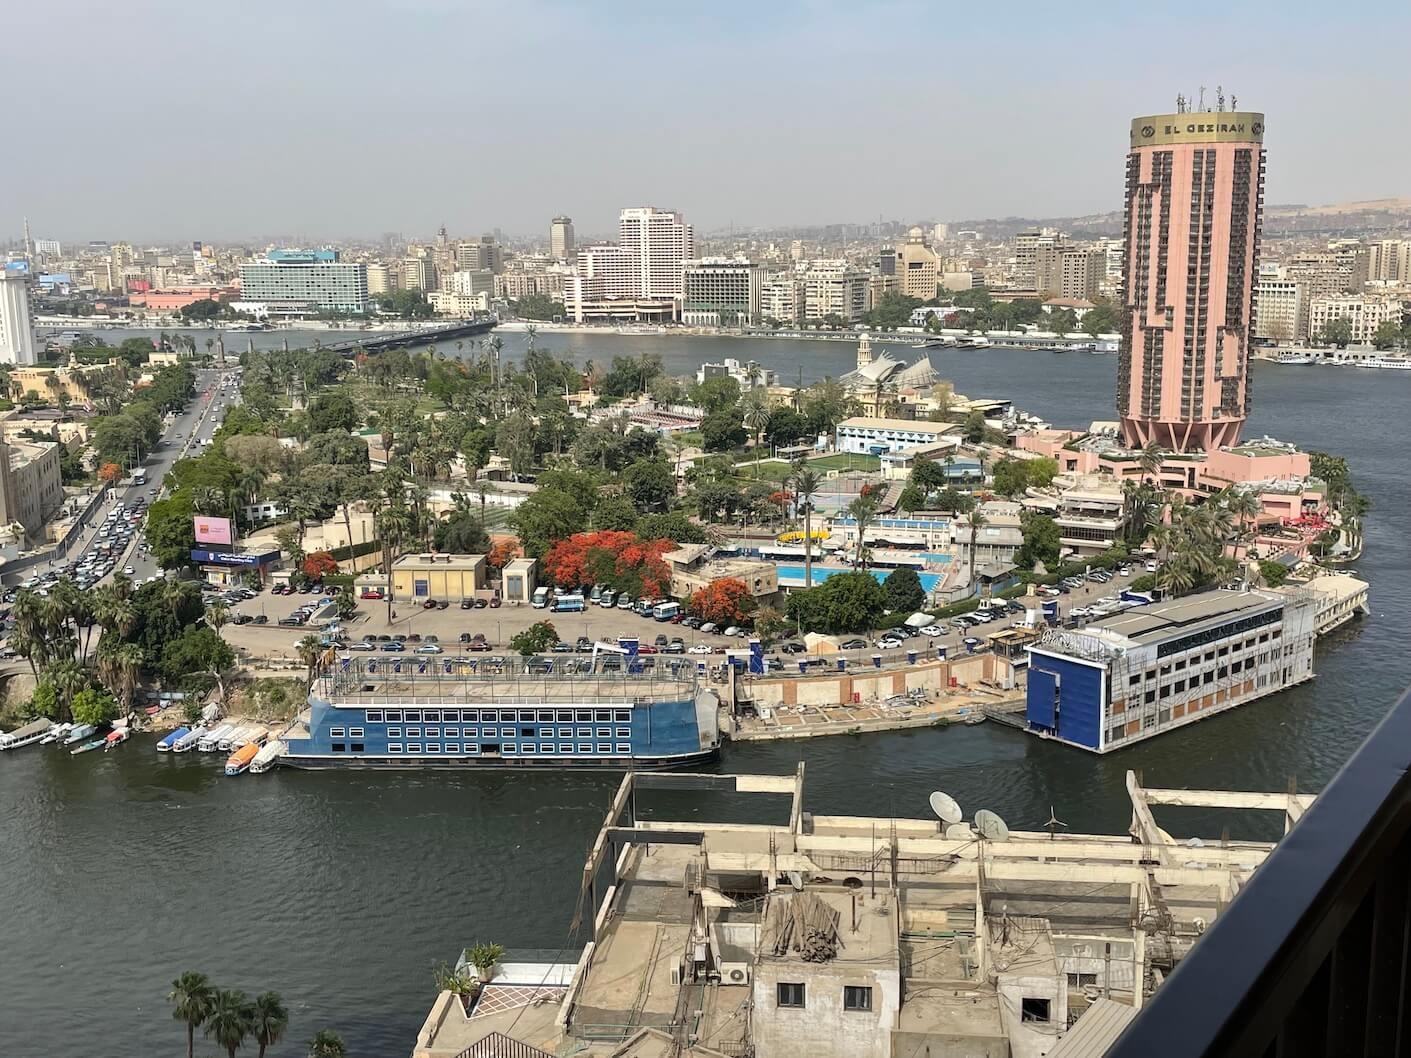 View of the Nile in Cairo and the Nile island of Gezira